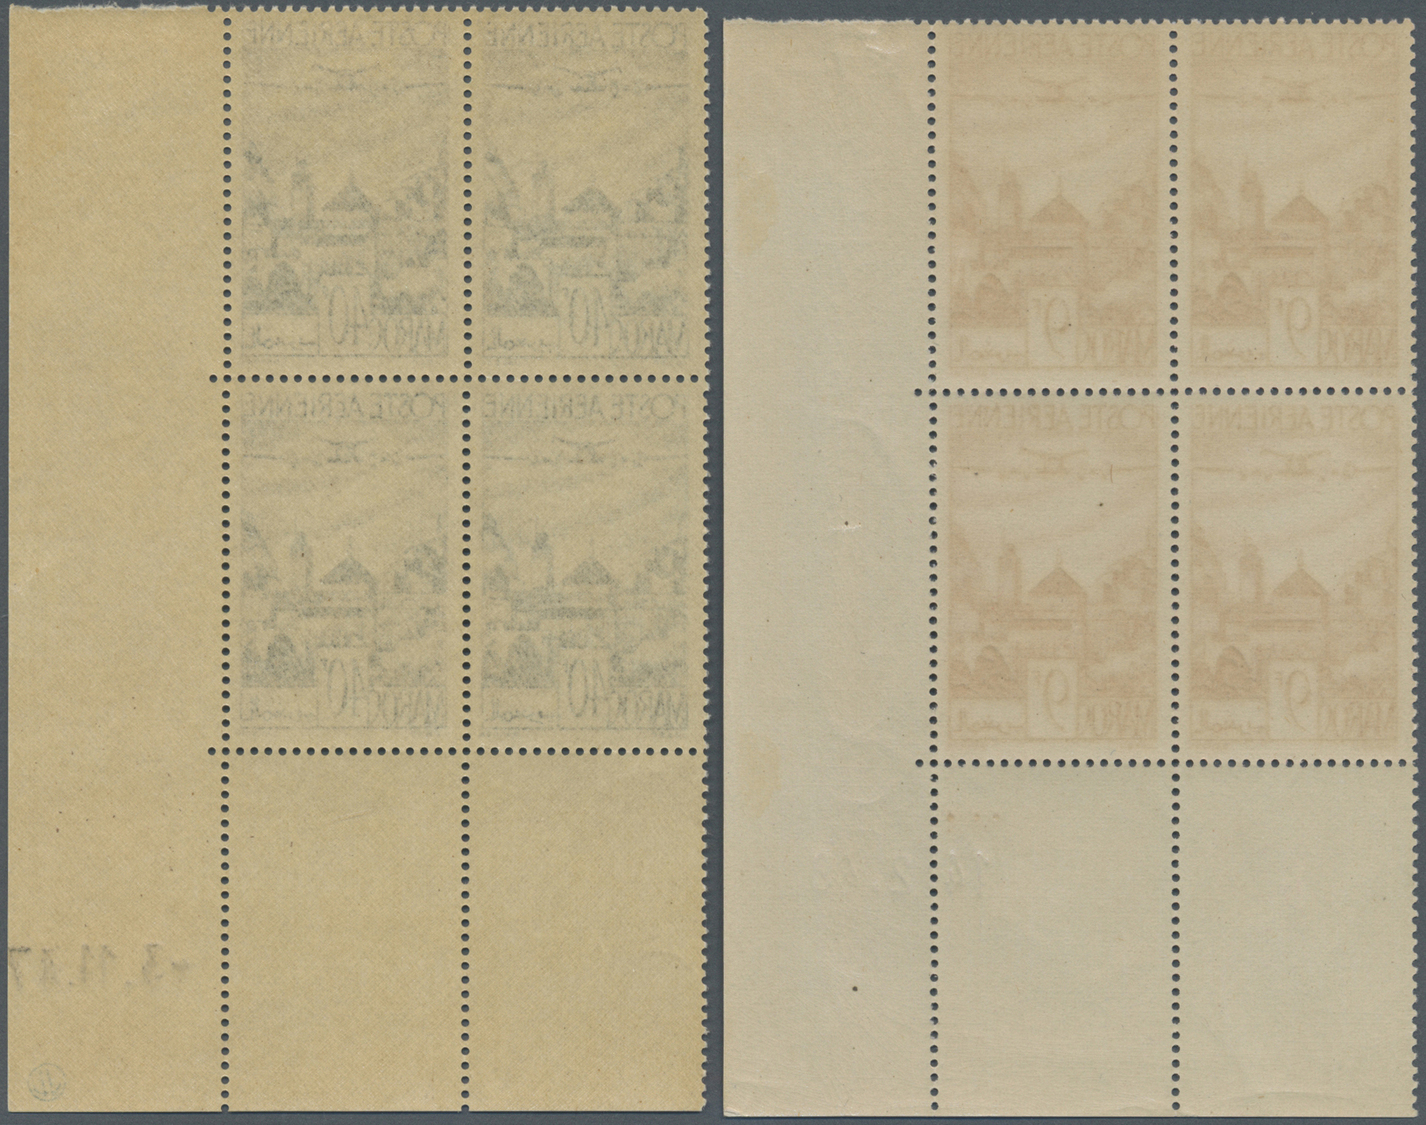 ** Marokko: 1947/1951, Airmails, group of eleven blocks of four from the lower right corner of the sheet, with different